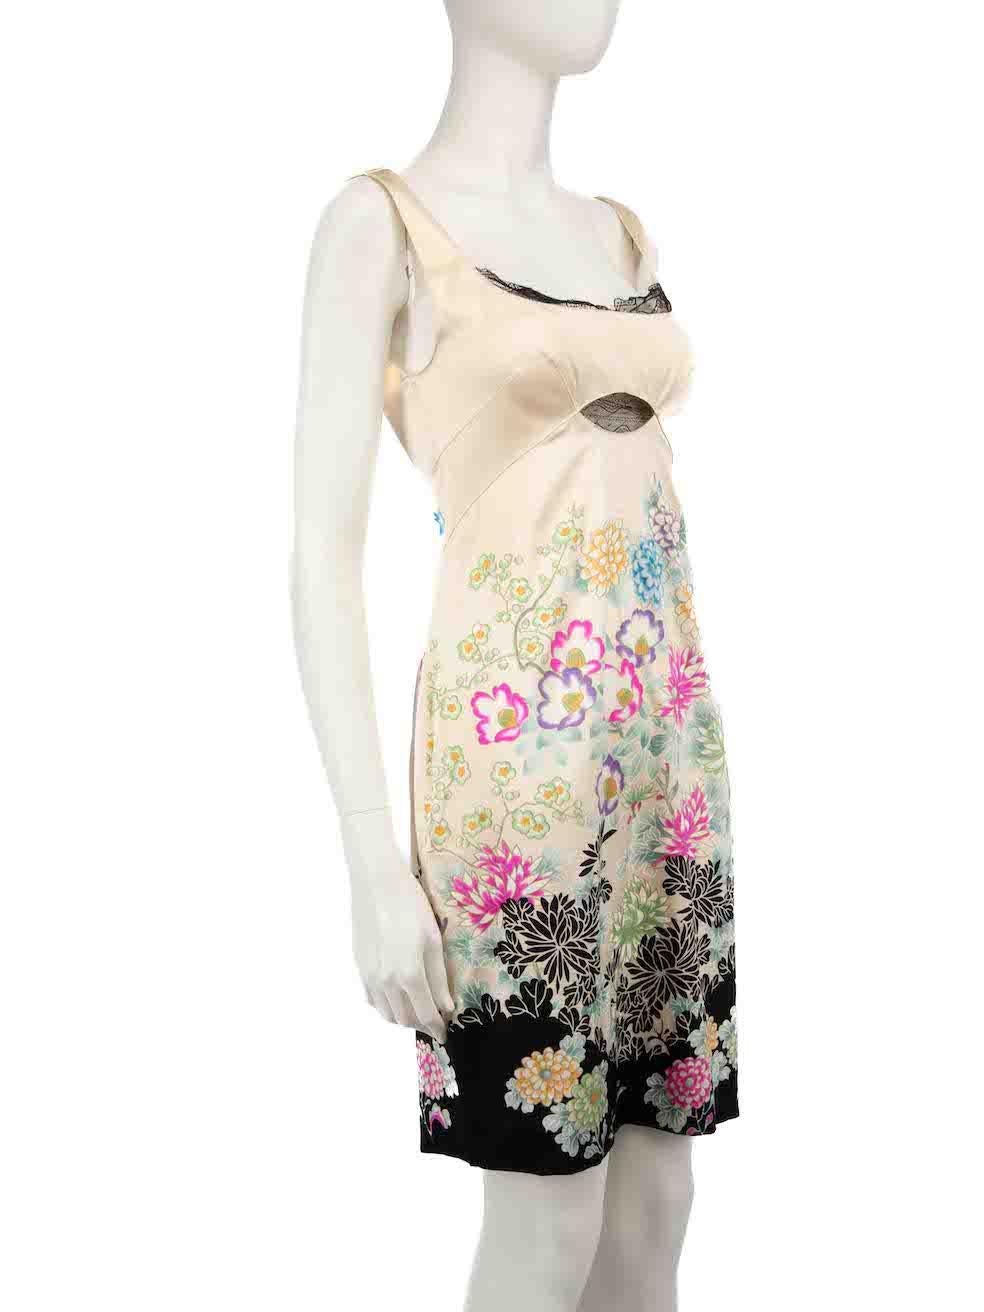 CONDITION is Very good. Hardly any visible wear to dress is evident. Loose threads can be seen to the underarm lining on this used Roberto Cavalli designer resale item.
 
 
 
 Details
 
 
 Multicolour
 
 Silk
 
 Slip dress
 
 Floral pattern
 
